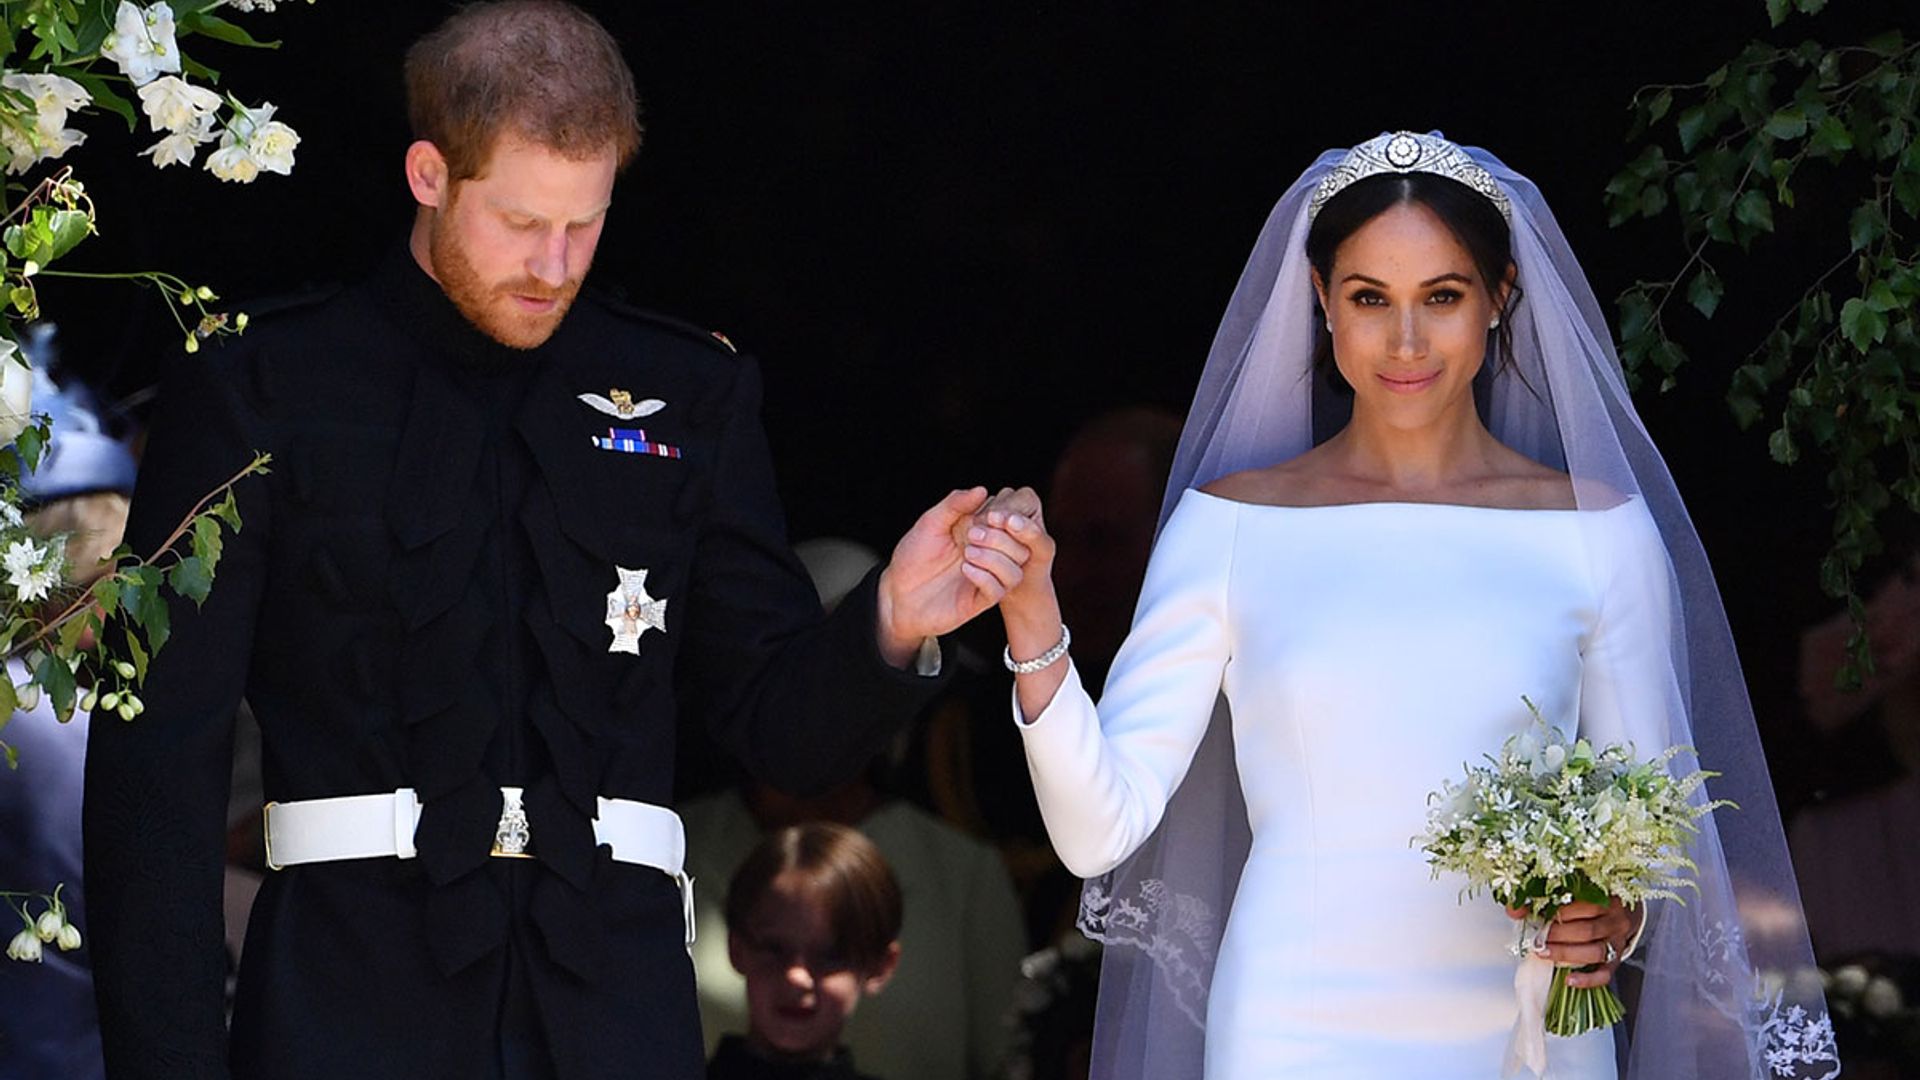 Prince Harry and Meghan Markle send gorgeous wedding photo after receiving well-wishes on first anniversary